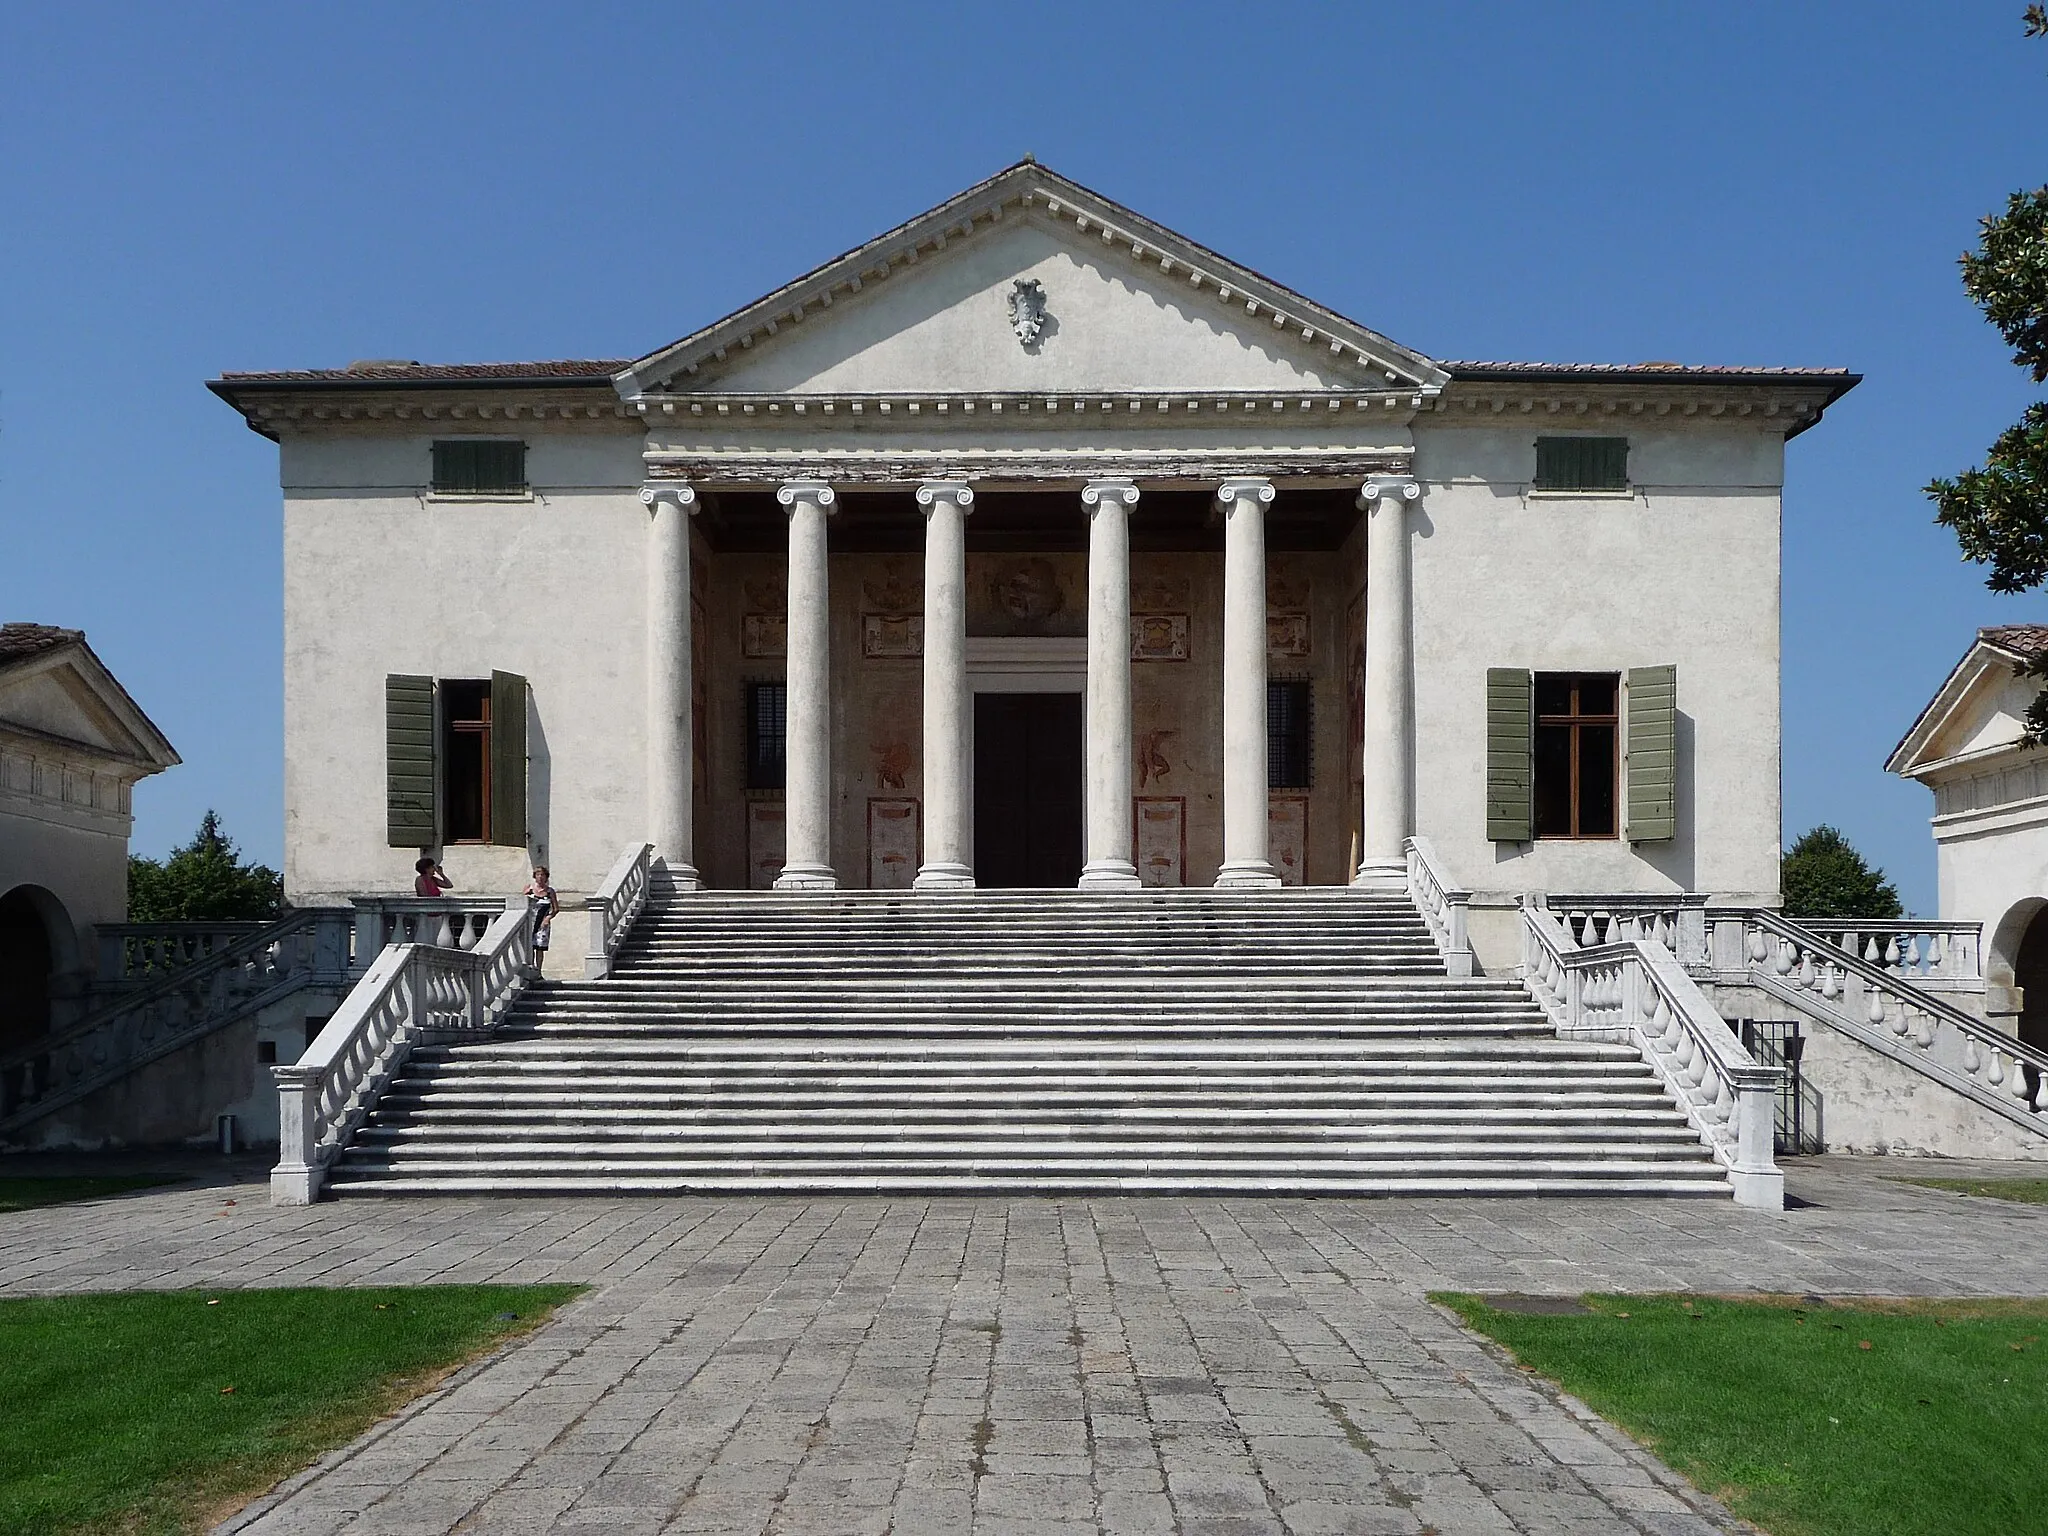 Photo showing: Villa Badoer in Fratta Polesine, province of Rovigo, Italy, designed by Andrea Palladio in 1554 and built 1556-1563.